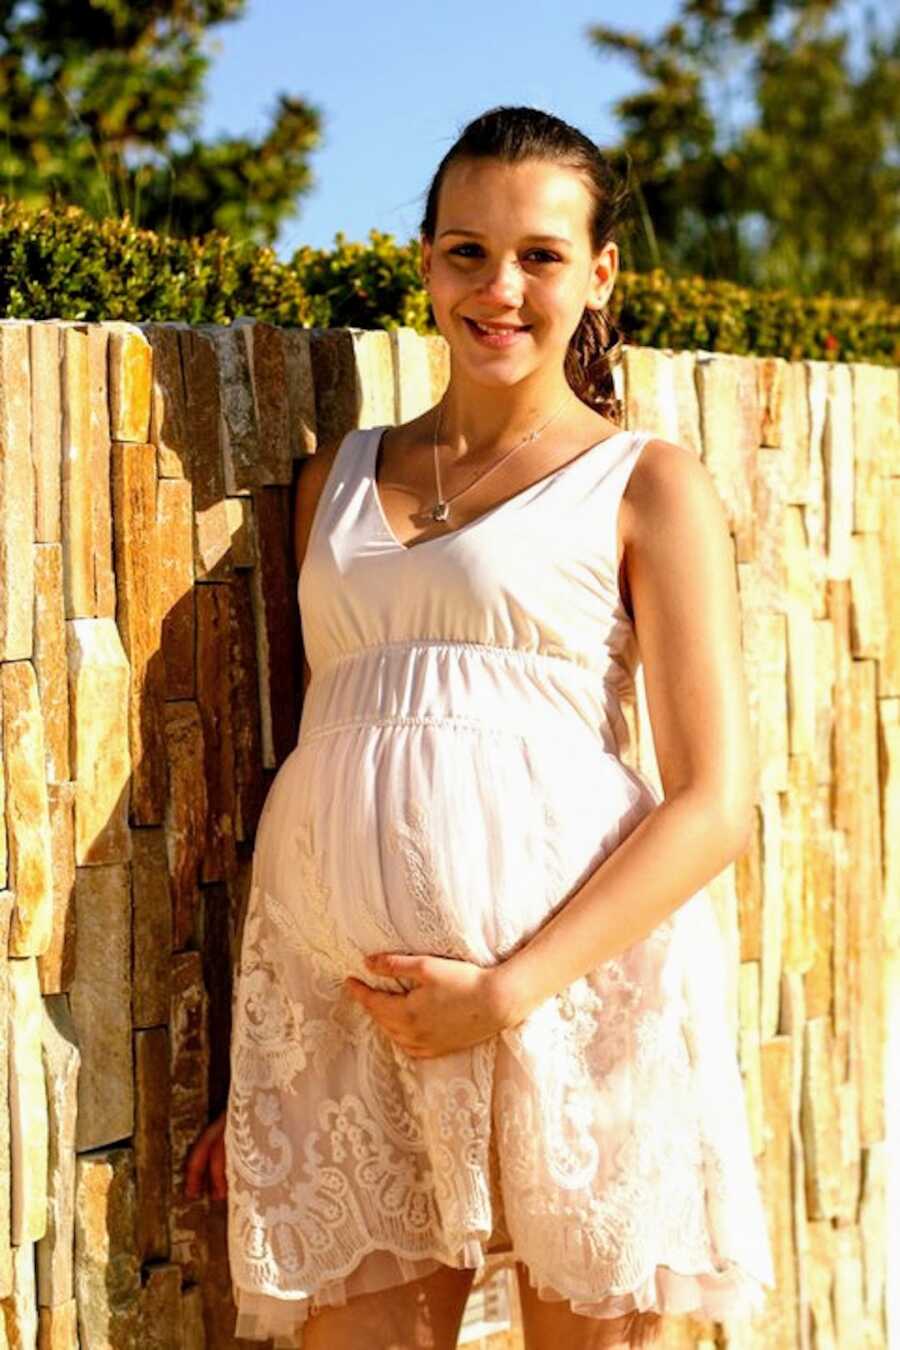 pregnant teen mom poses in a dress smiling while holding her baby bump